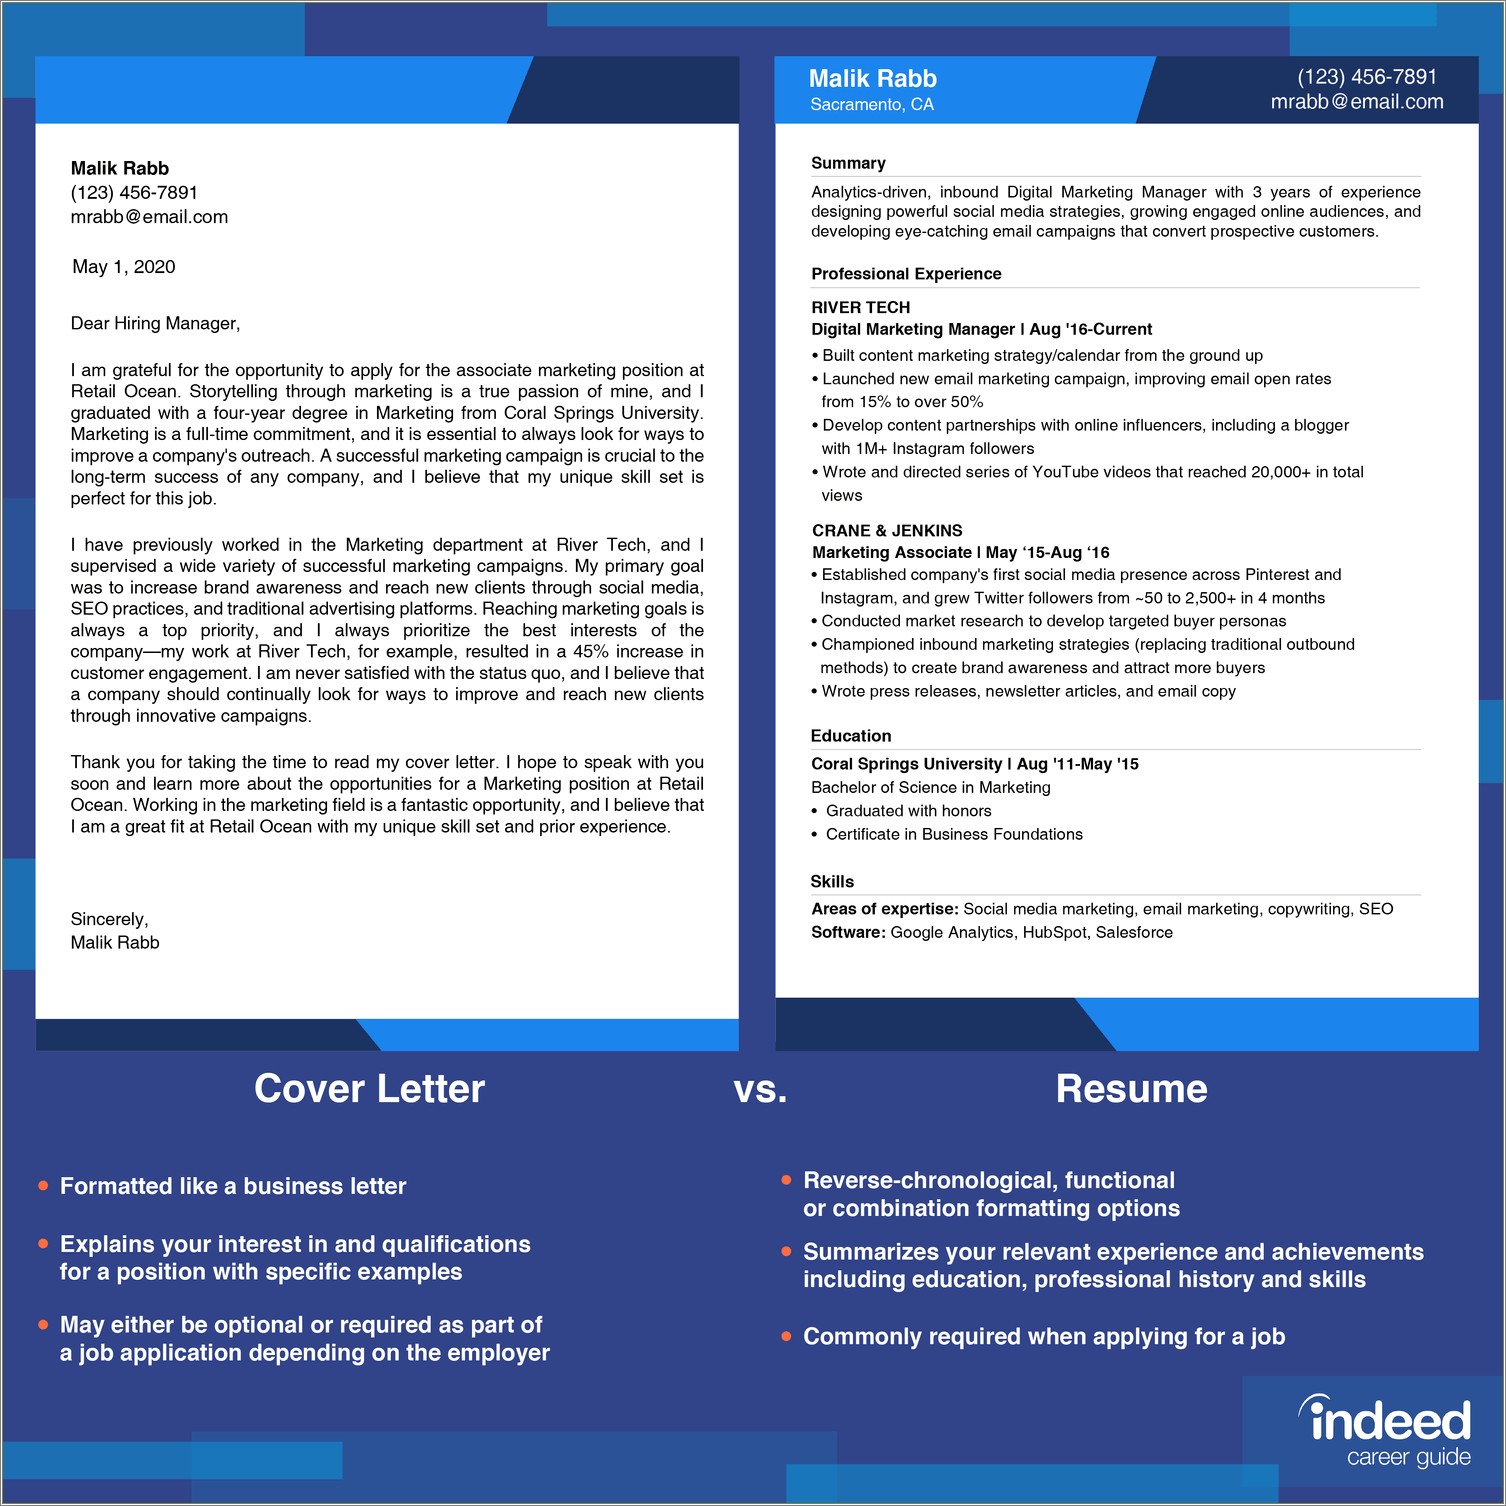 Difference Between Cover Letter And Resume For Job